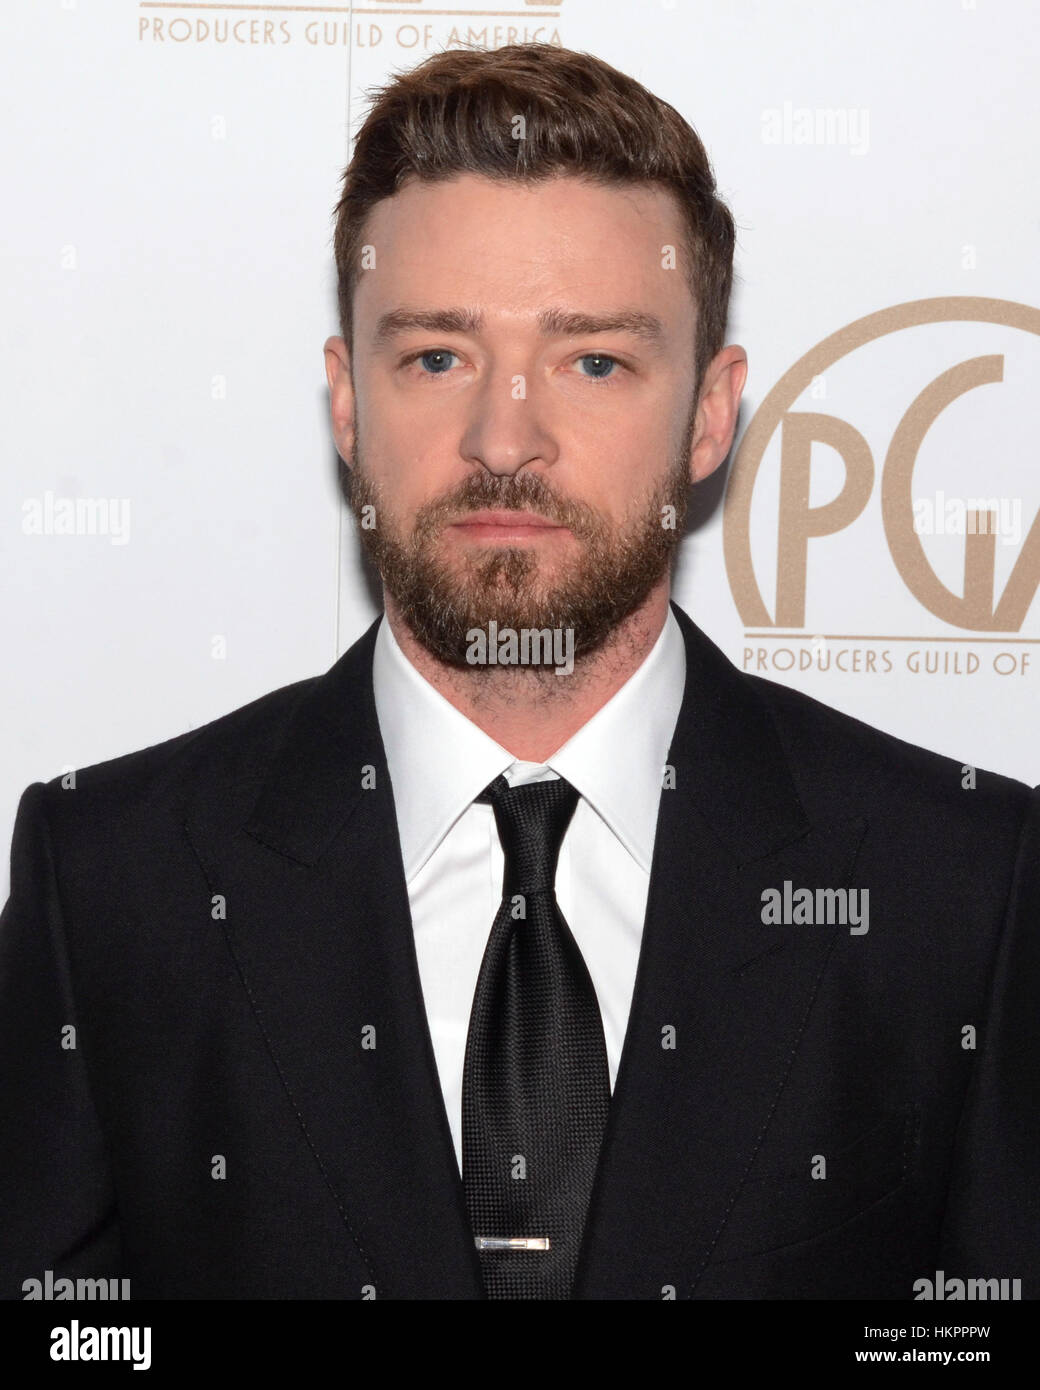 Justin Timberlake arrives at the 28th Annual Producers Guild Awards at The Beverly Hilton Hotel in Beverly Hills, California on January 28, 2017. Stock Photo